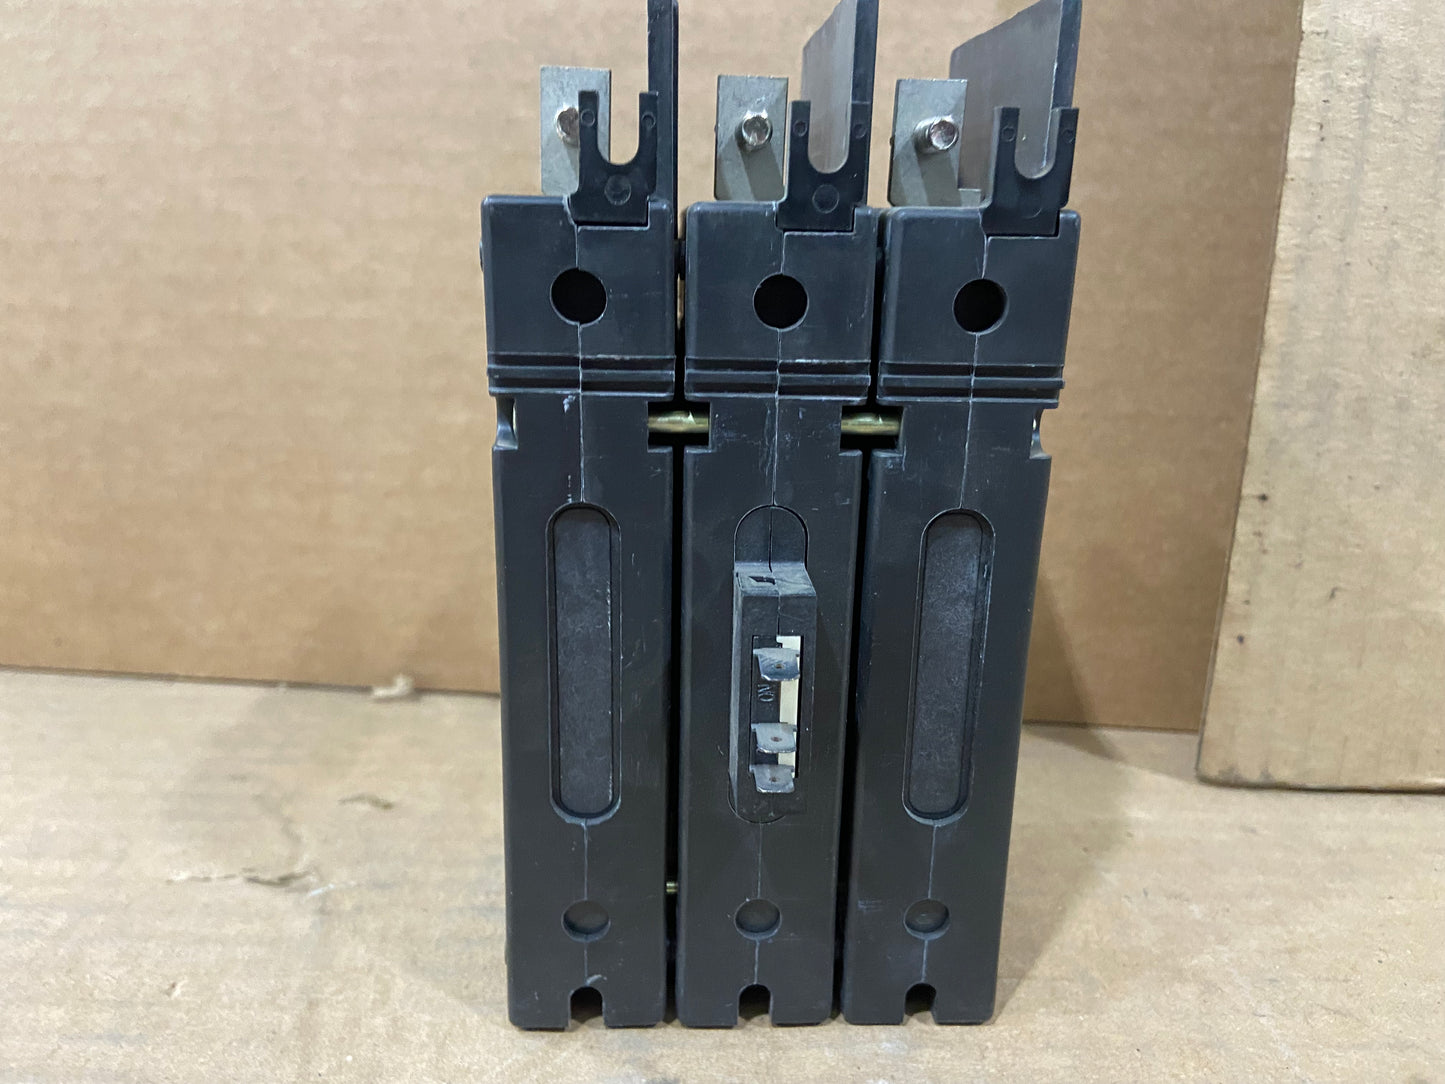 3 POLE 25.8 AMP "219 MULTI-POLE" SERIES HYDRAULIC MAGNETIC CIRCUIT BREAKER PROTECTOR/FOR MANUAL MOTOR CONTROLLER APPLICATIONS 480/50-60/1 OR 3